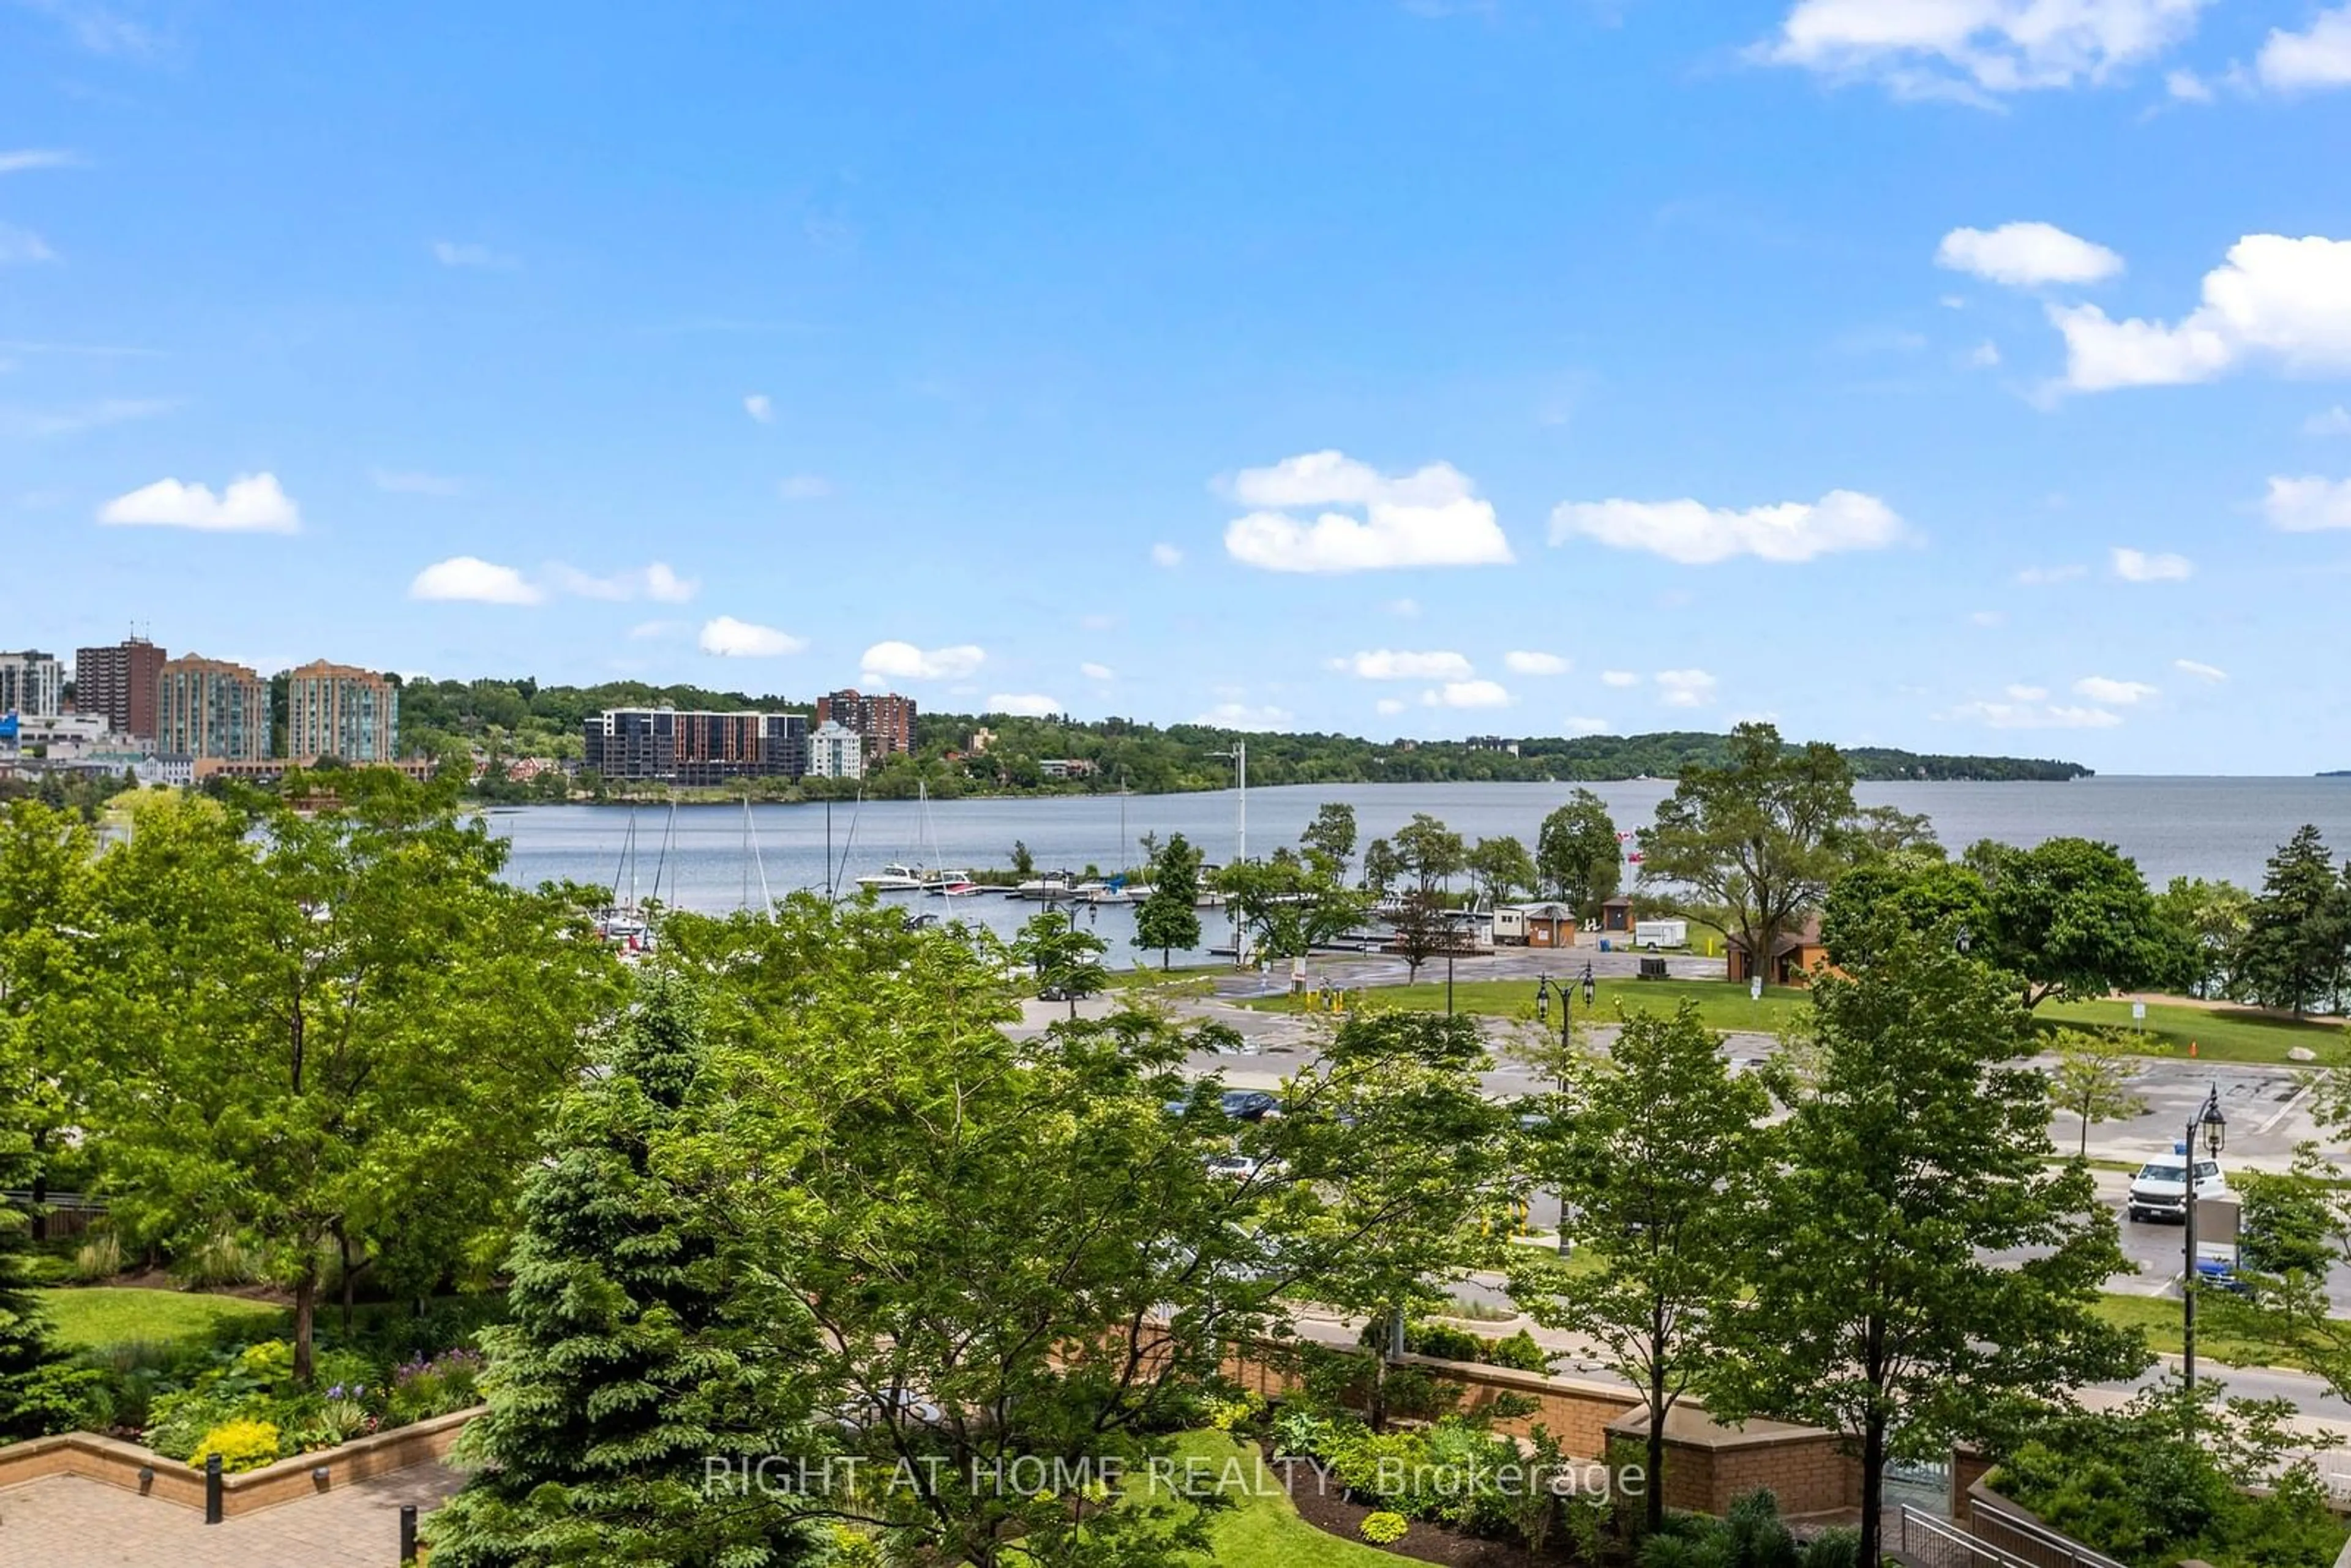 Lakeview for 37 Ellen St #504, Barrie Ontario L4N 6G2